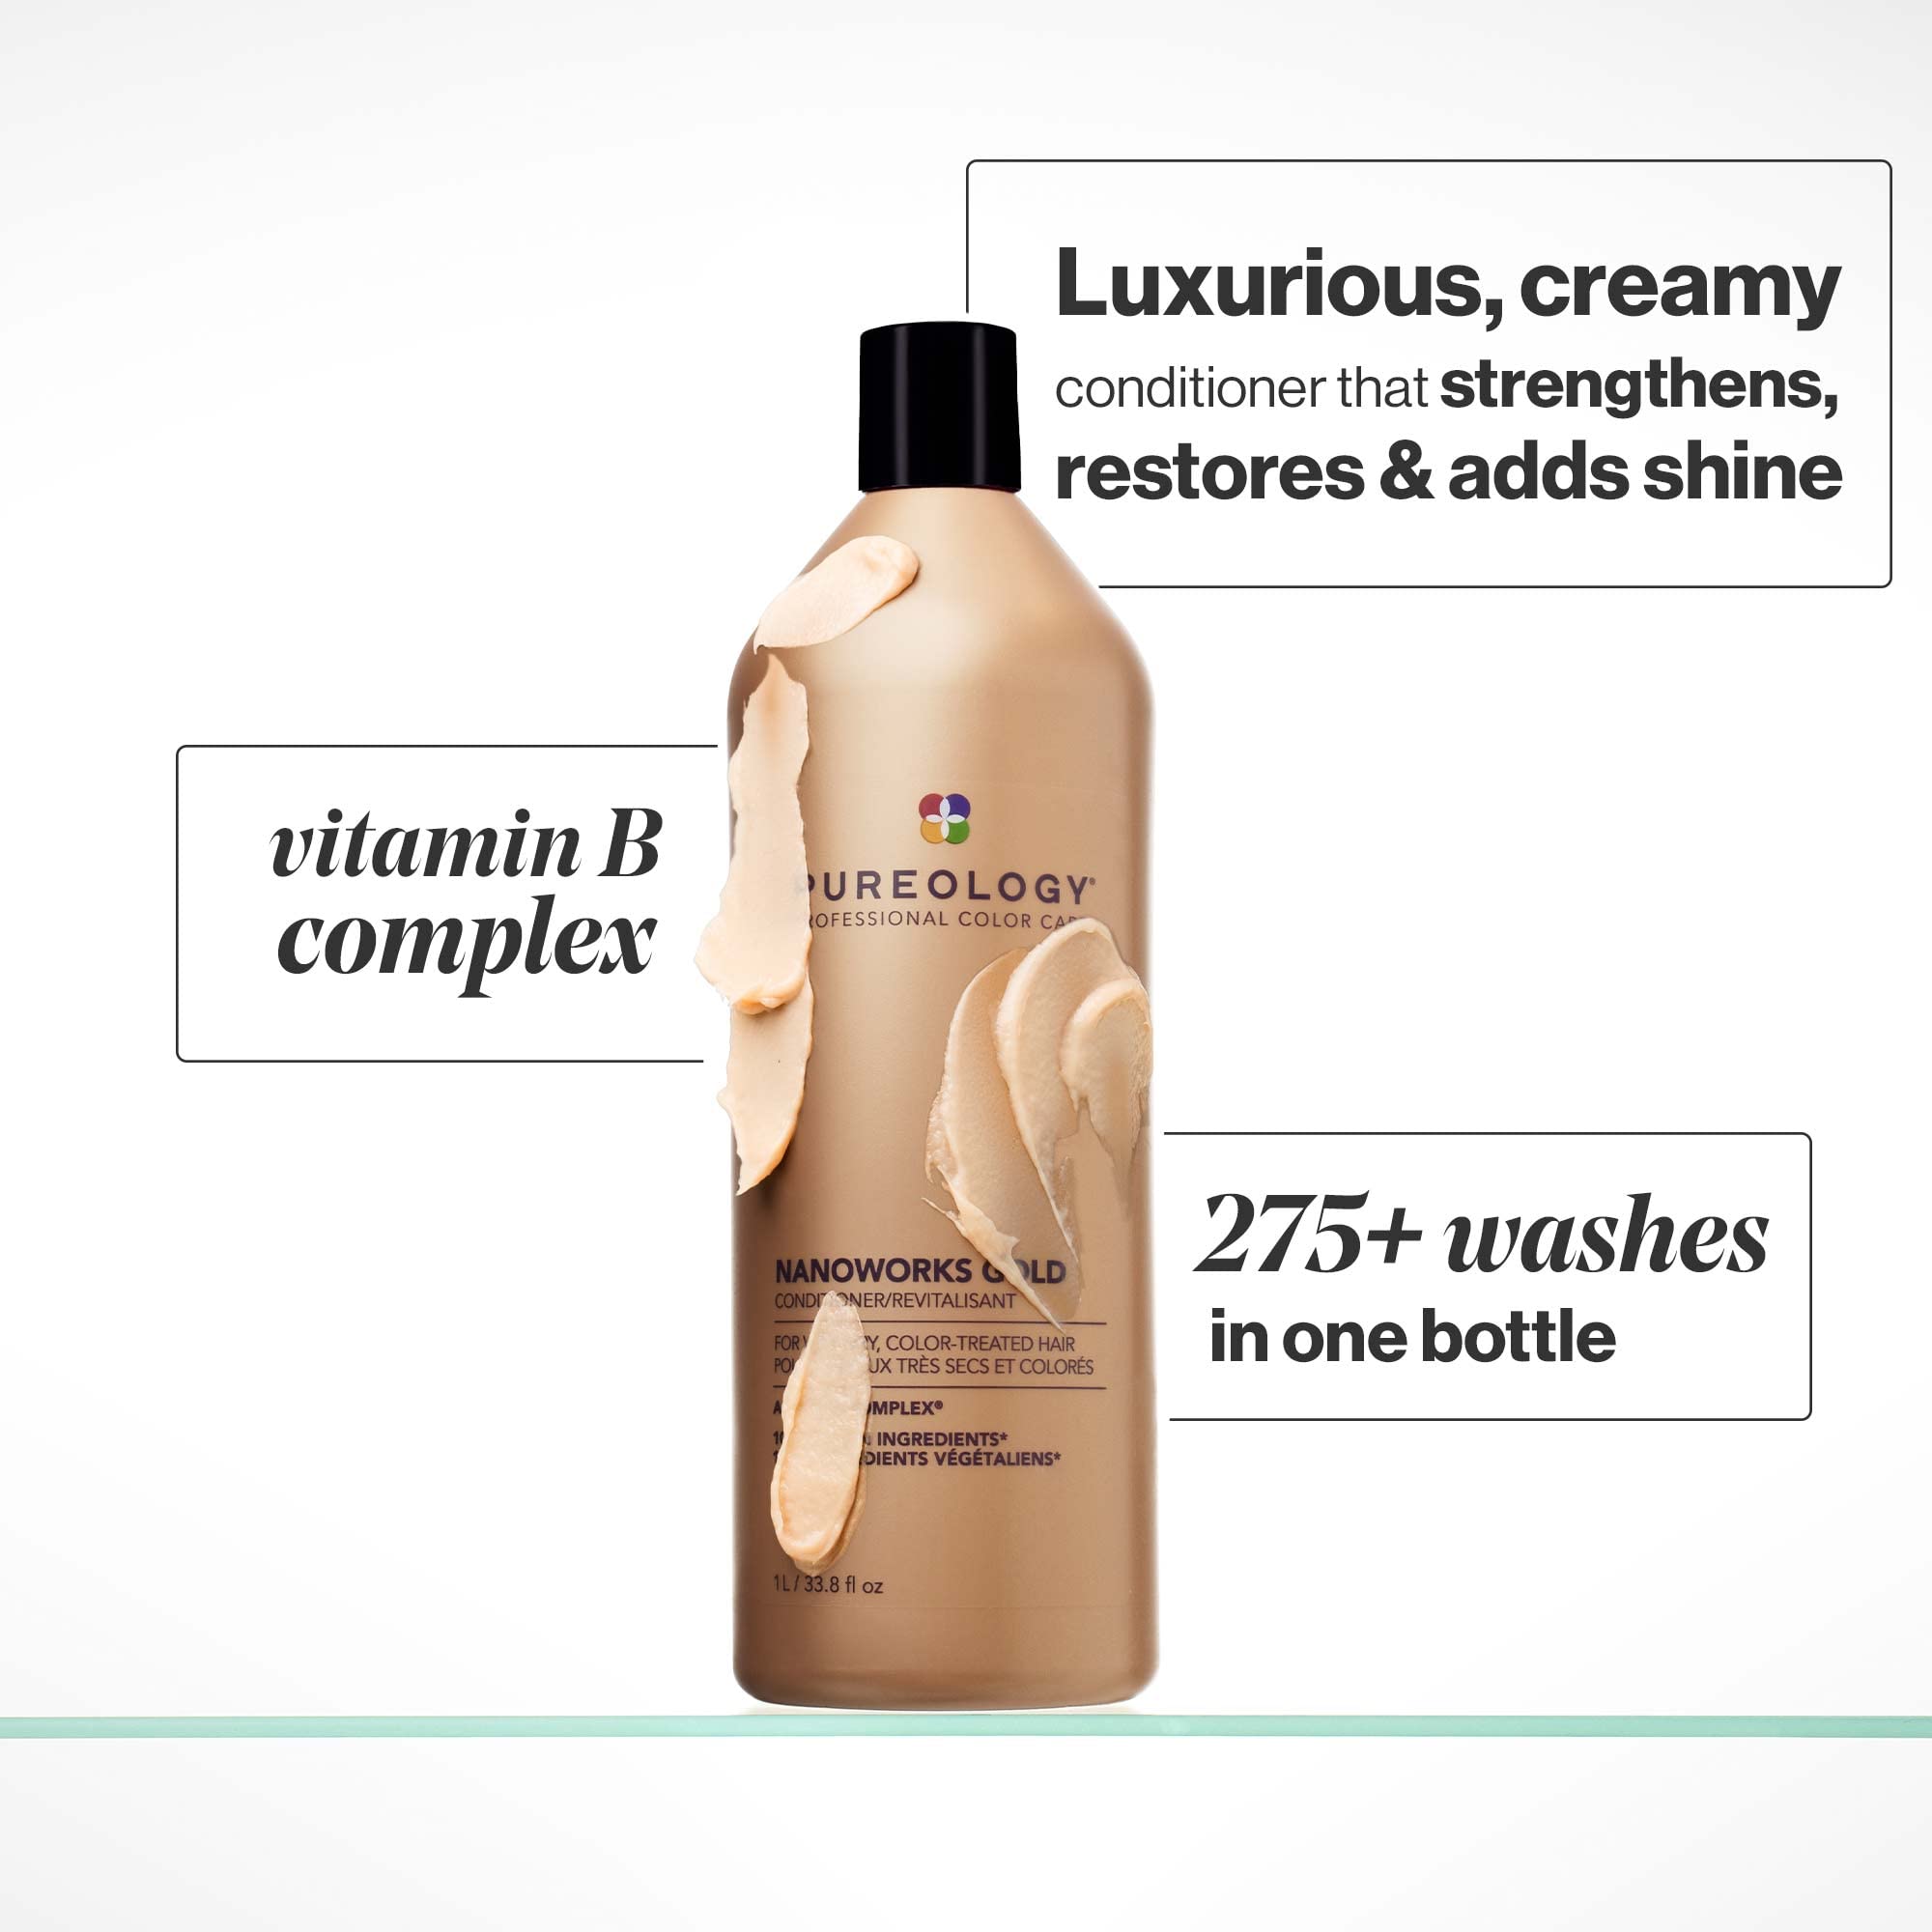 Pureology Nanoworks Gold Conditioner | For Very Dry, Color-Treated Hair | Restores & Strengthens Hair | Sulfate-Free | Vegan